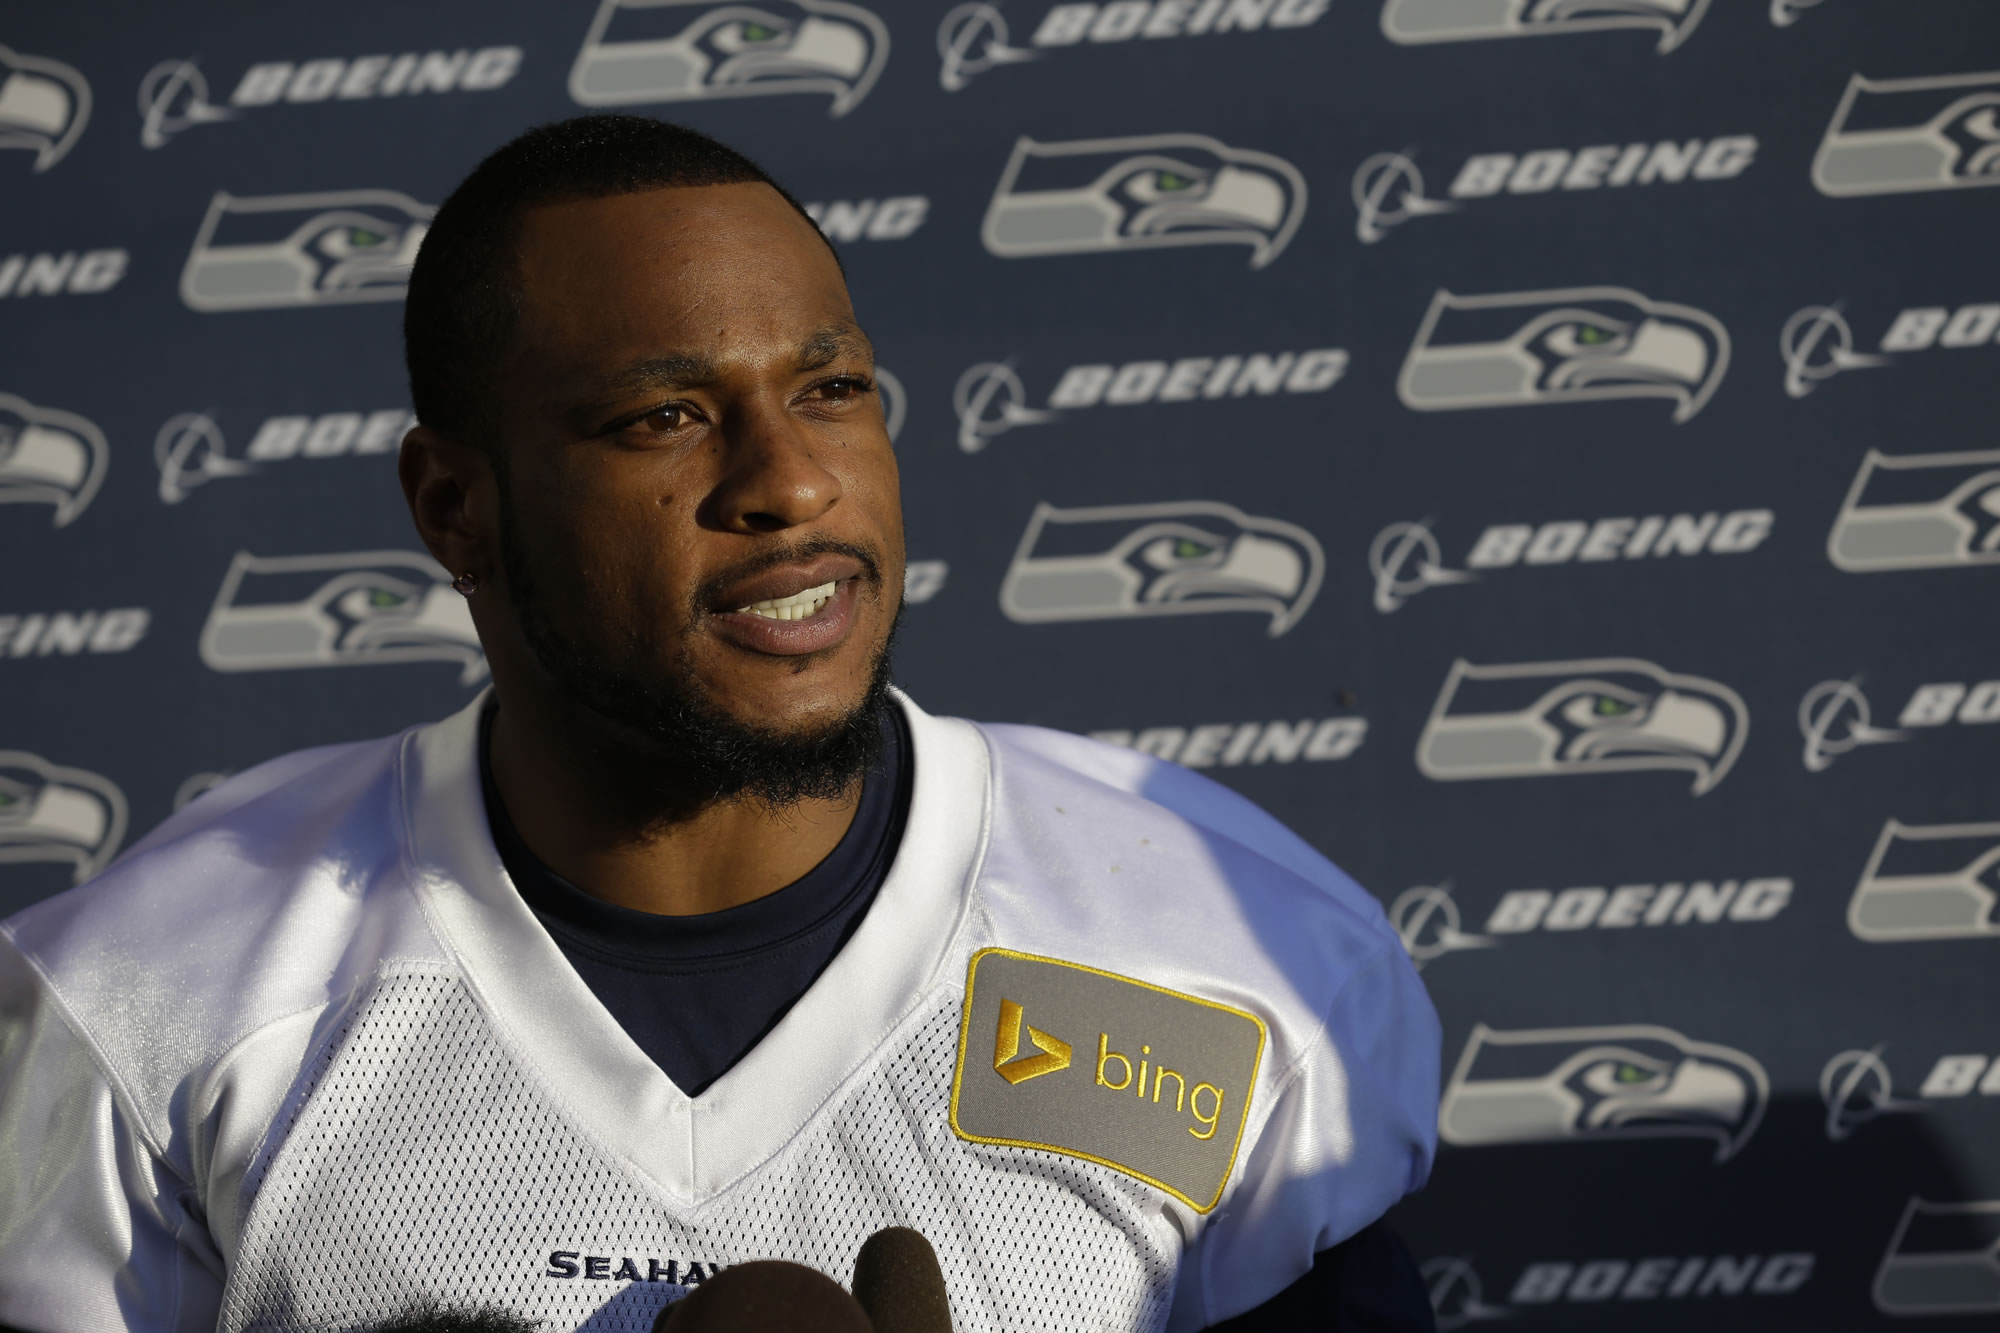 Seattle Seahawks wide receiver Percy Harvin talks to reporters following NFL football practice, Tuesday, Oct. 22, 2013, in Renton, Wash. It was Harvin's first full team practice since he injured his hip during the off-season. (AP Photo/Ted S.